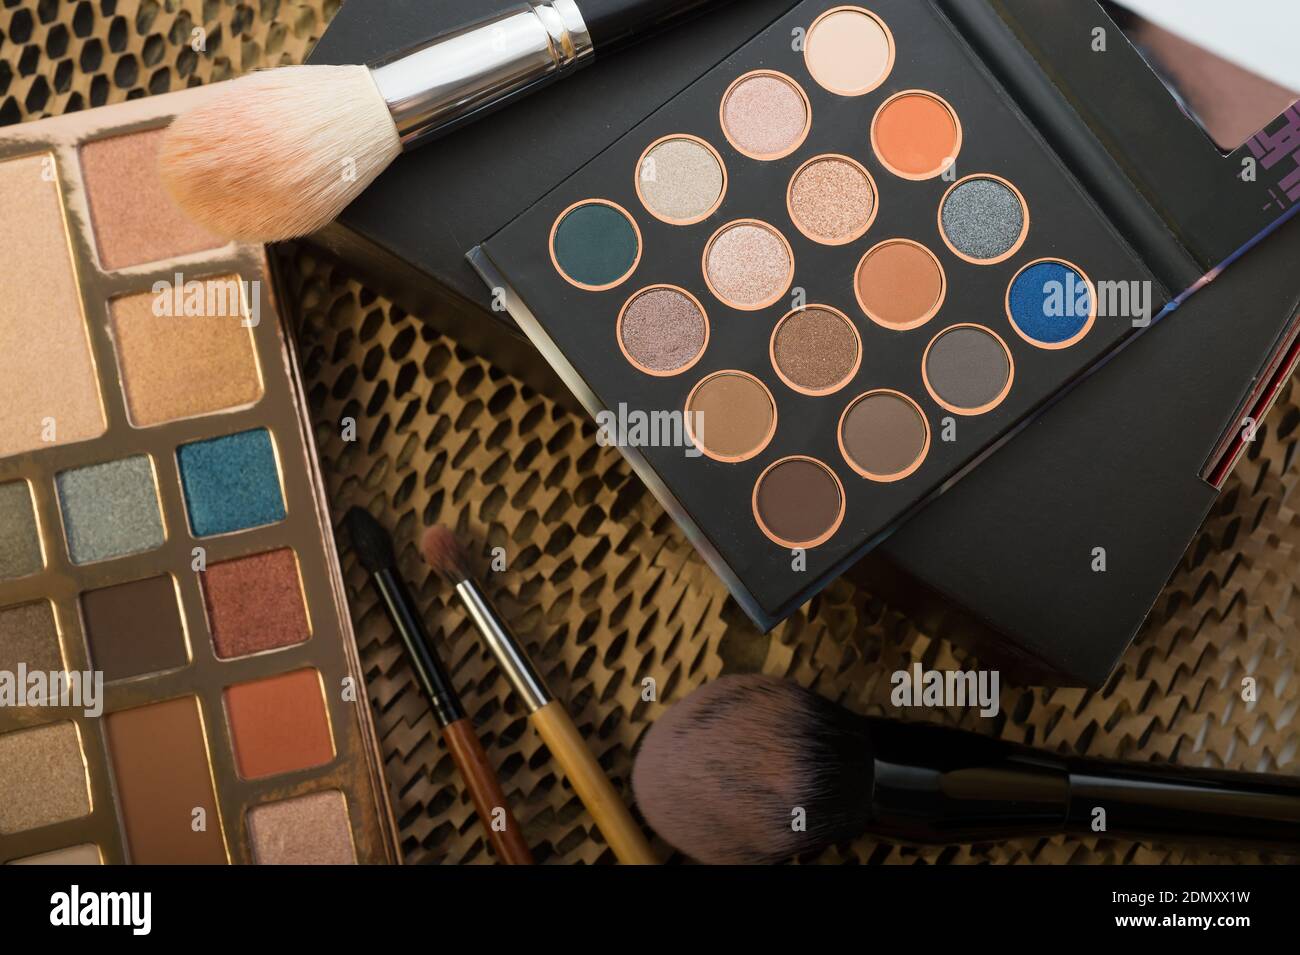 High Angle View Of Eyeshadow Palettes On Table Stock Photo